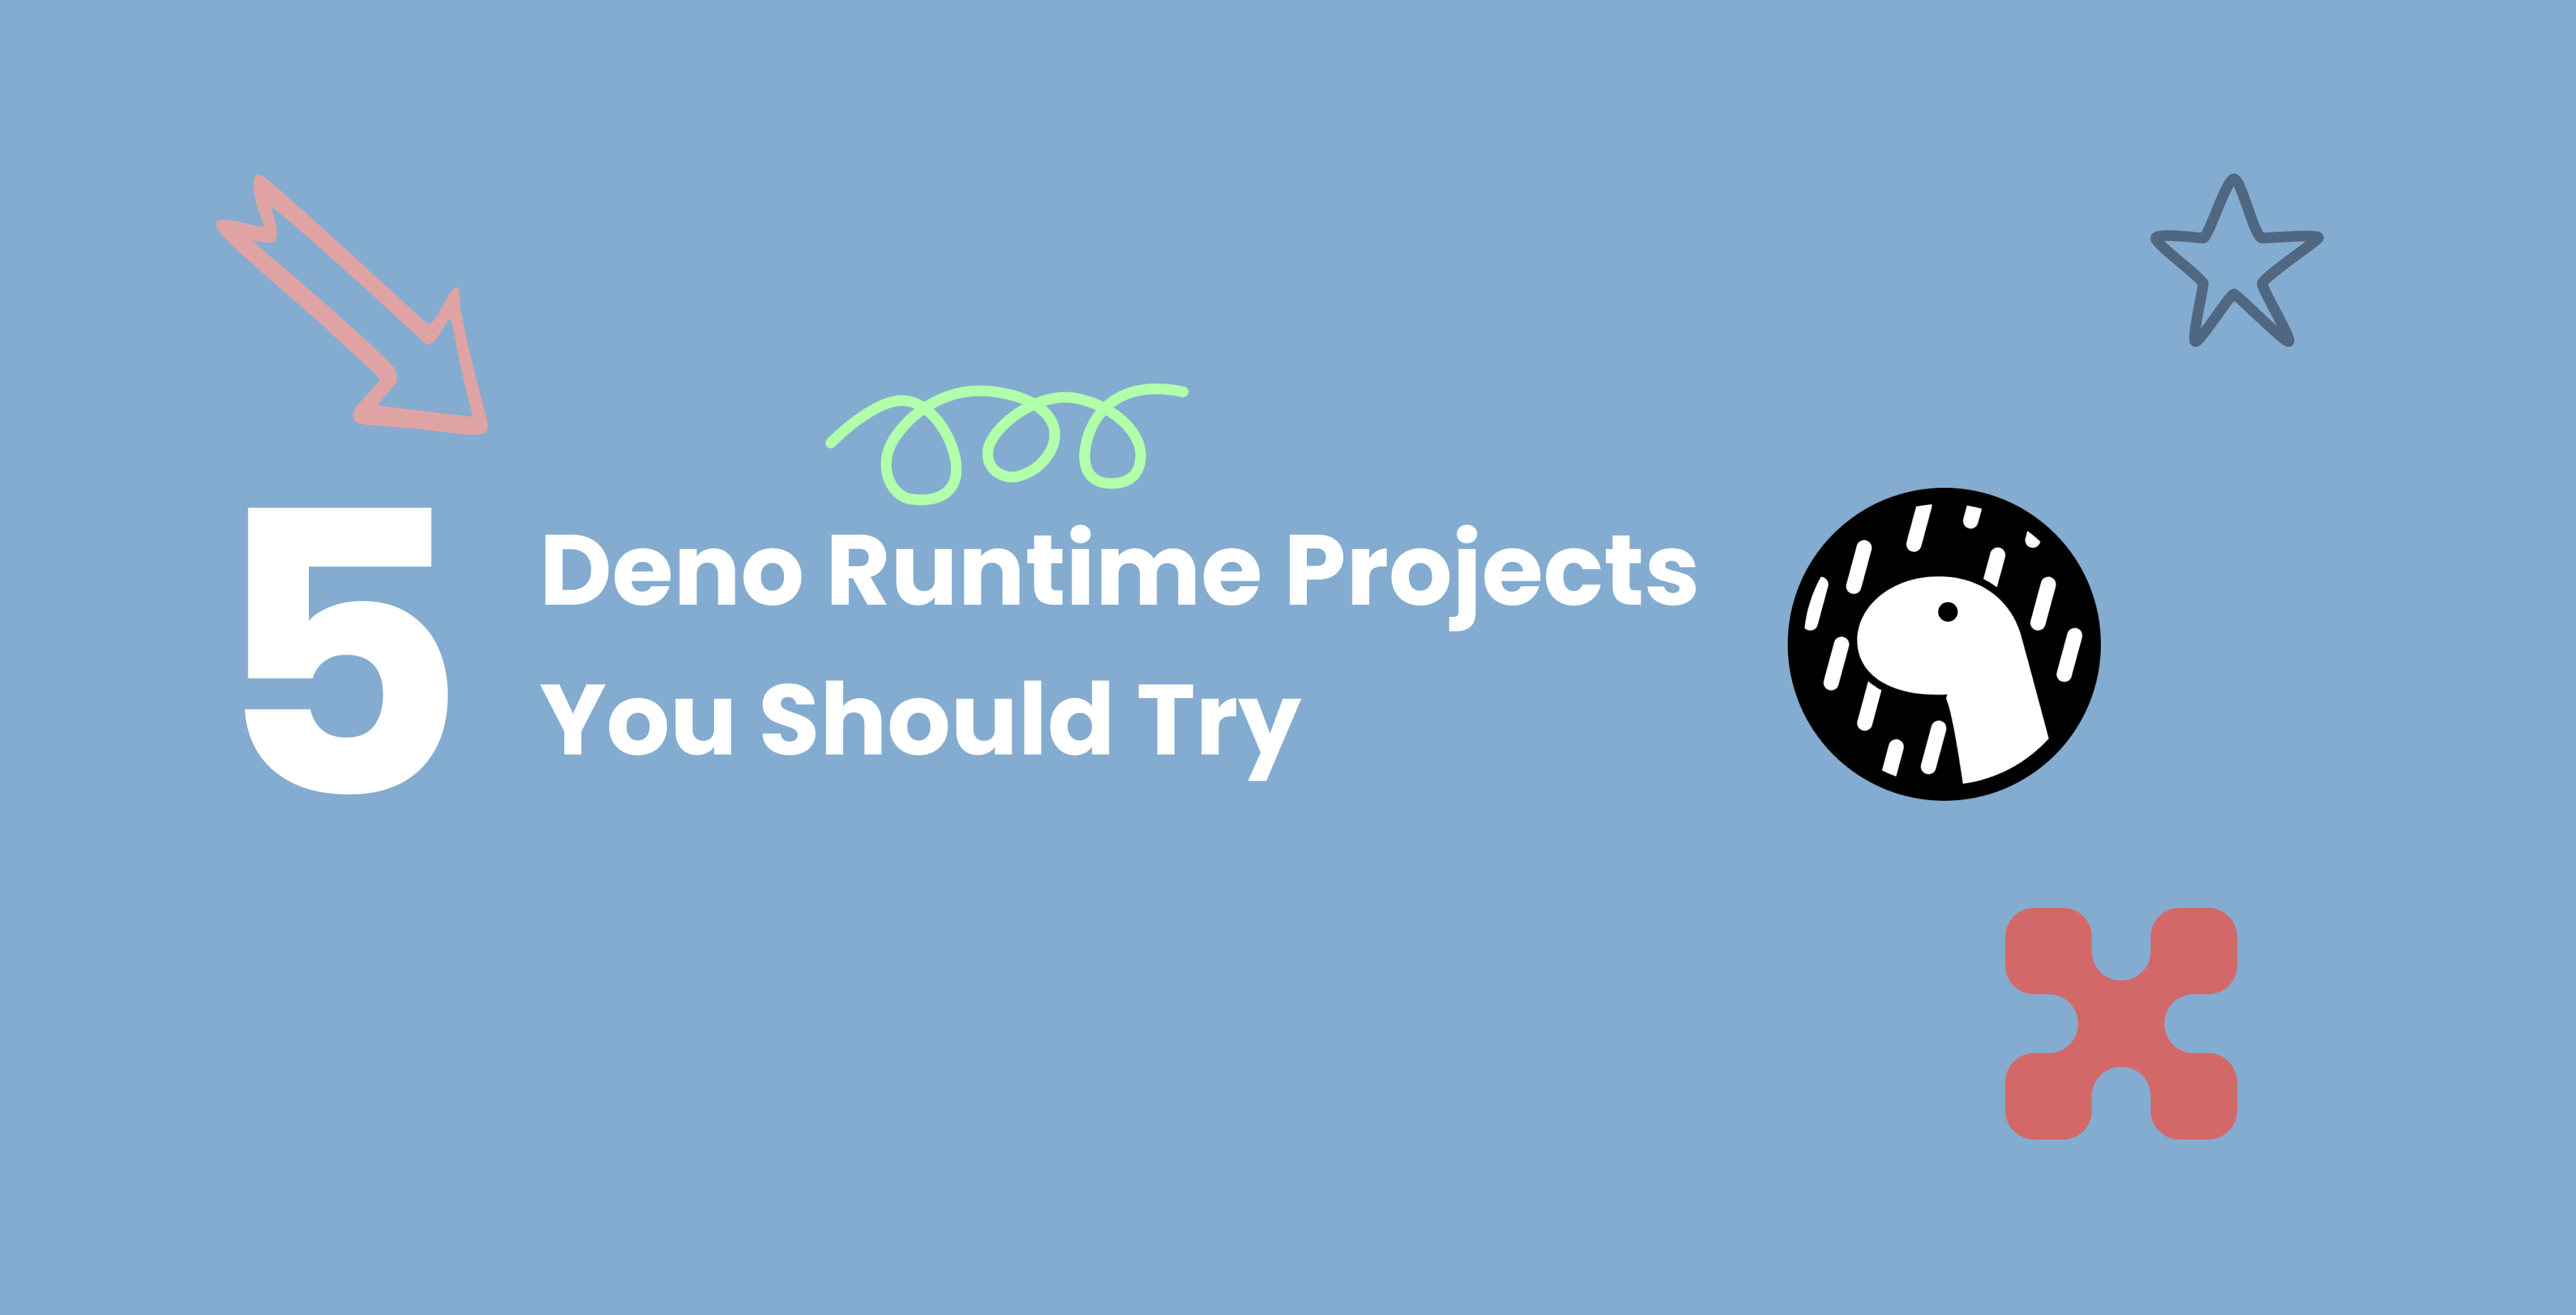  5 Deno Runtime Projects You Should Try